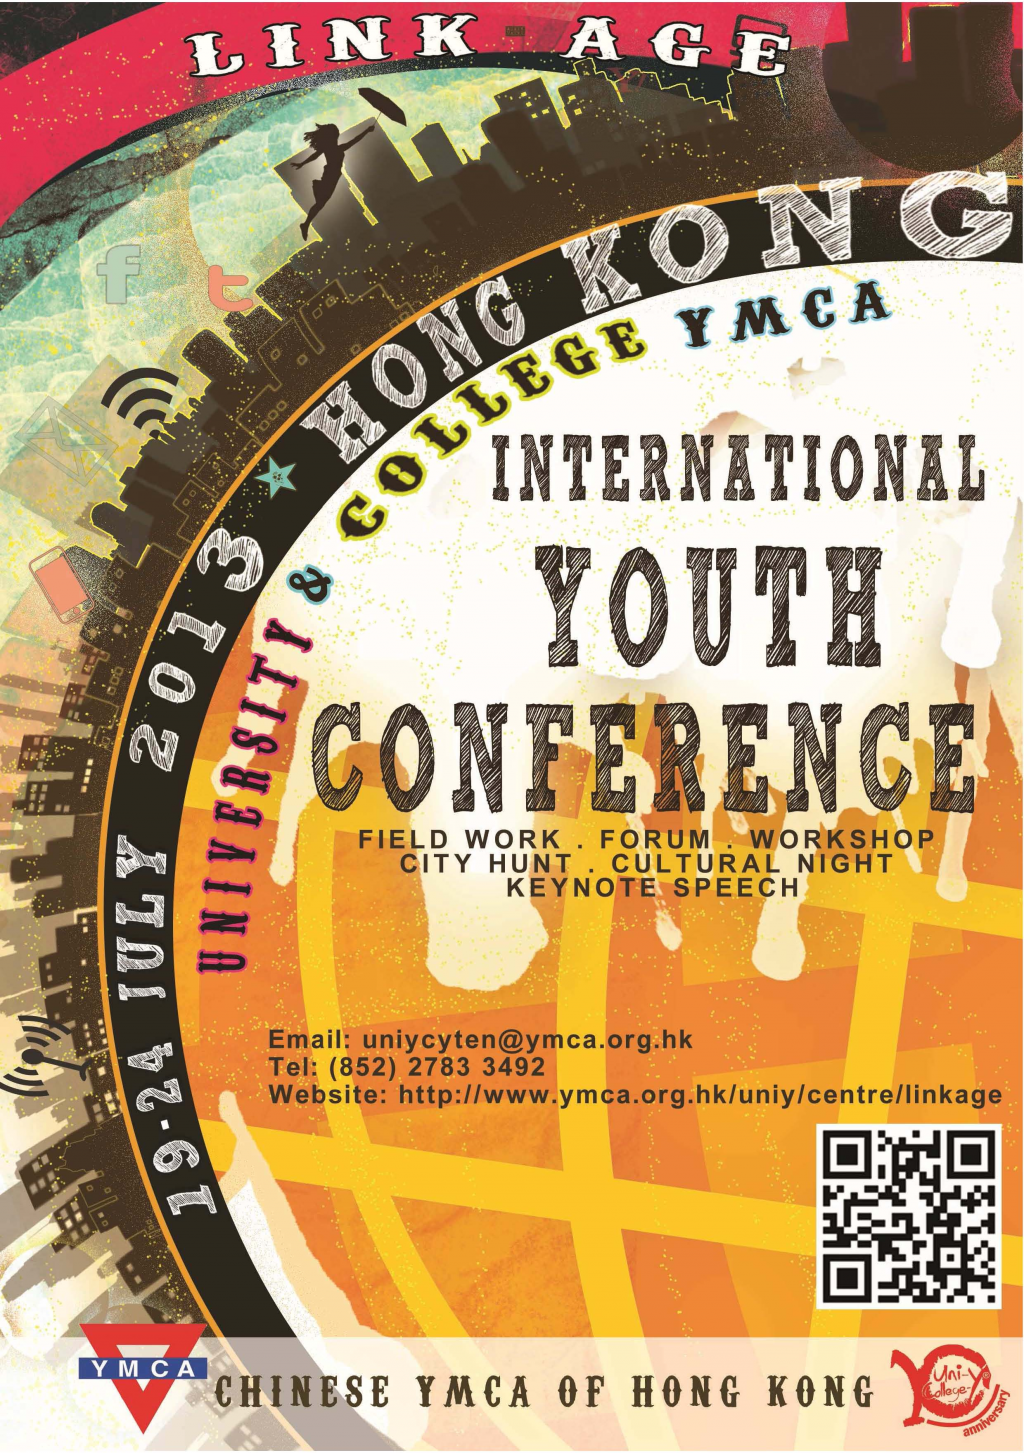 Link-Age: University & College YMCA International Youth Conference